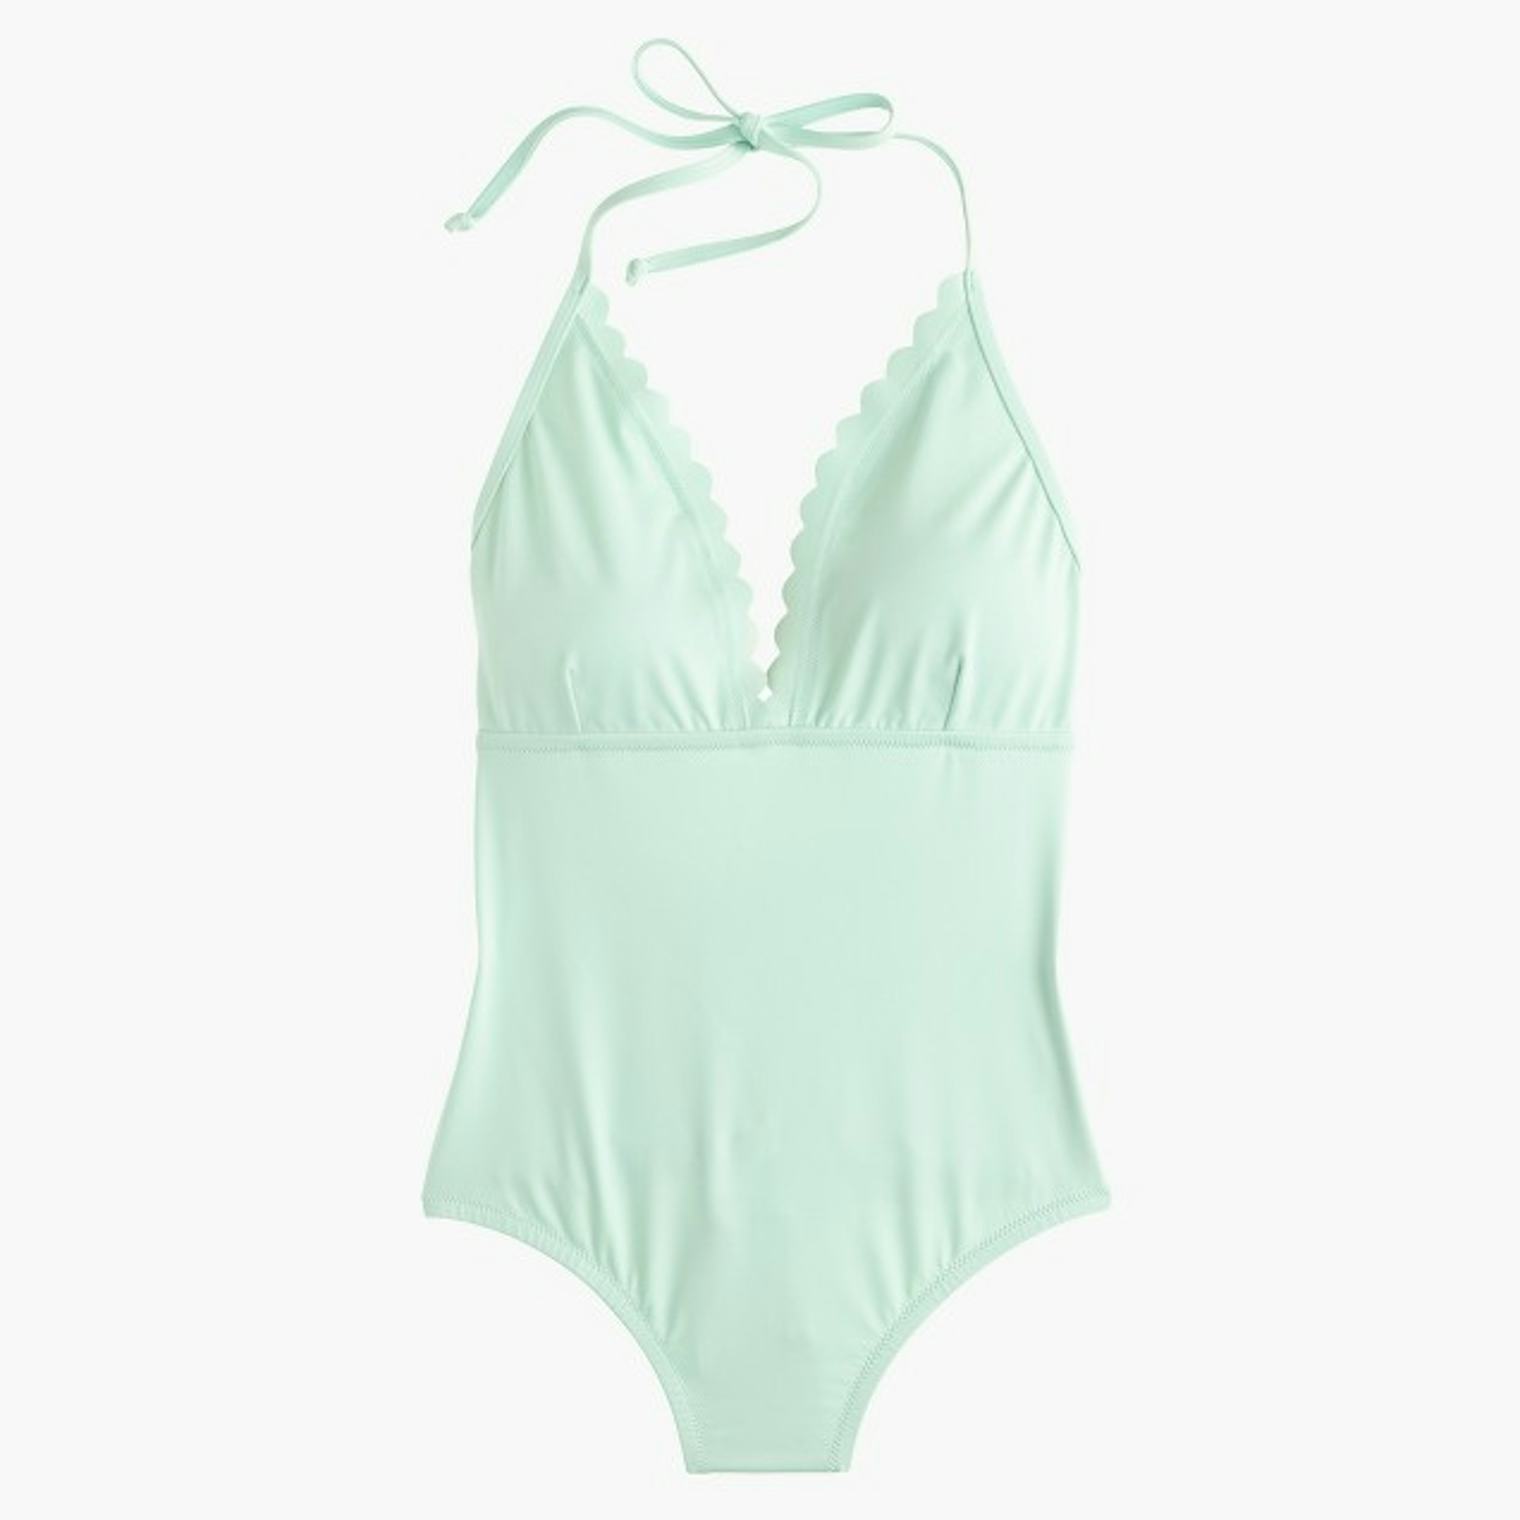 9 Long Torso One-Piece Swimsuits For Tall Girls That Are Actually Cute